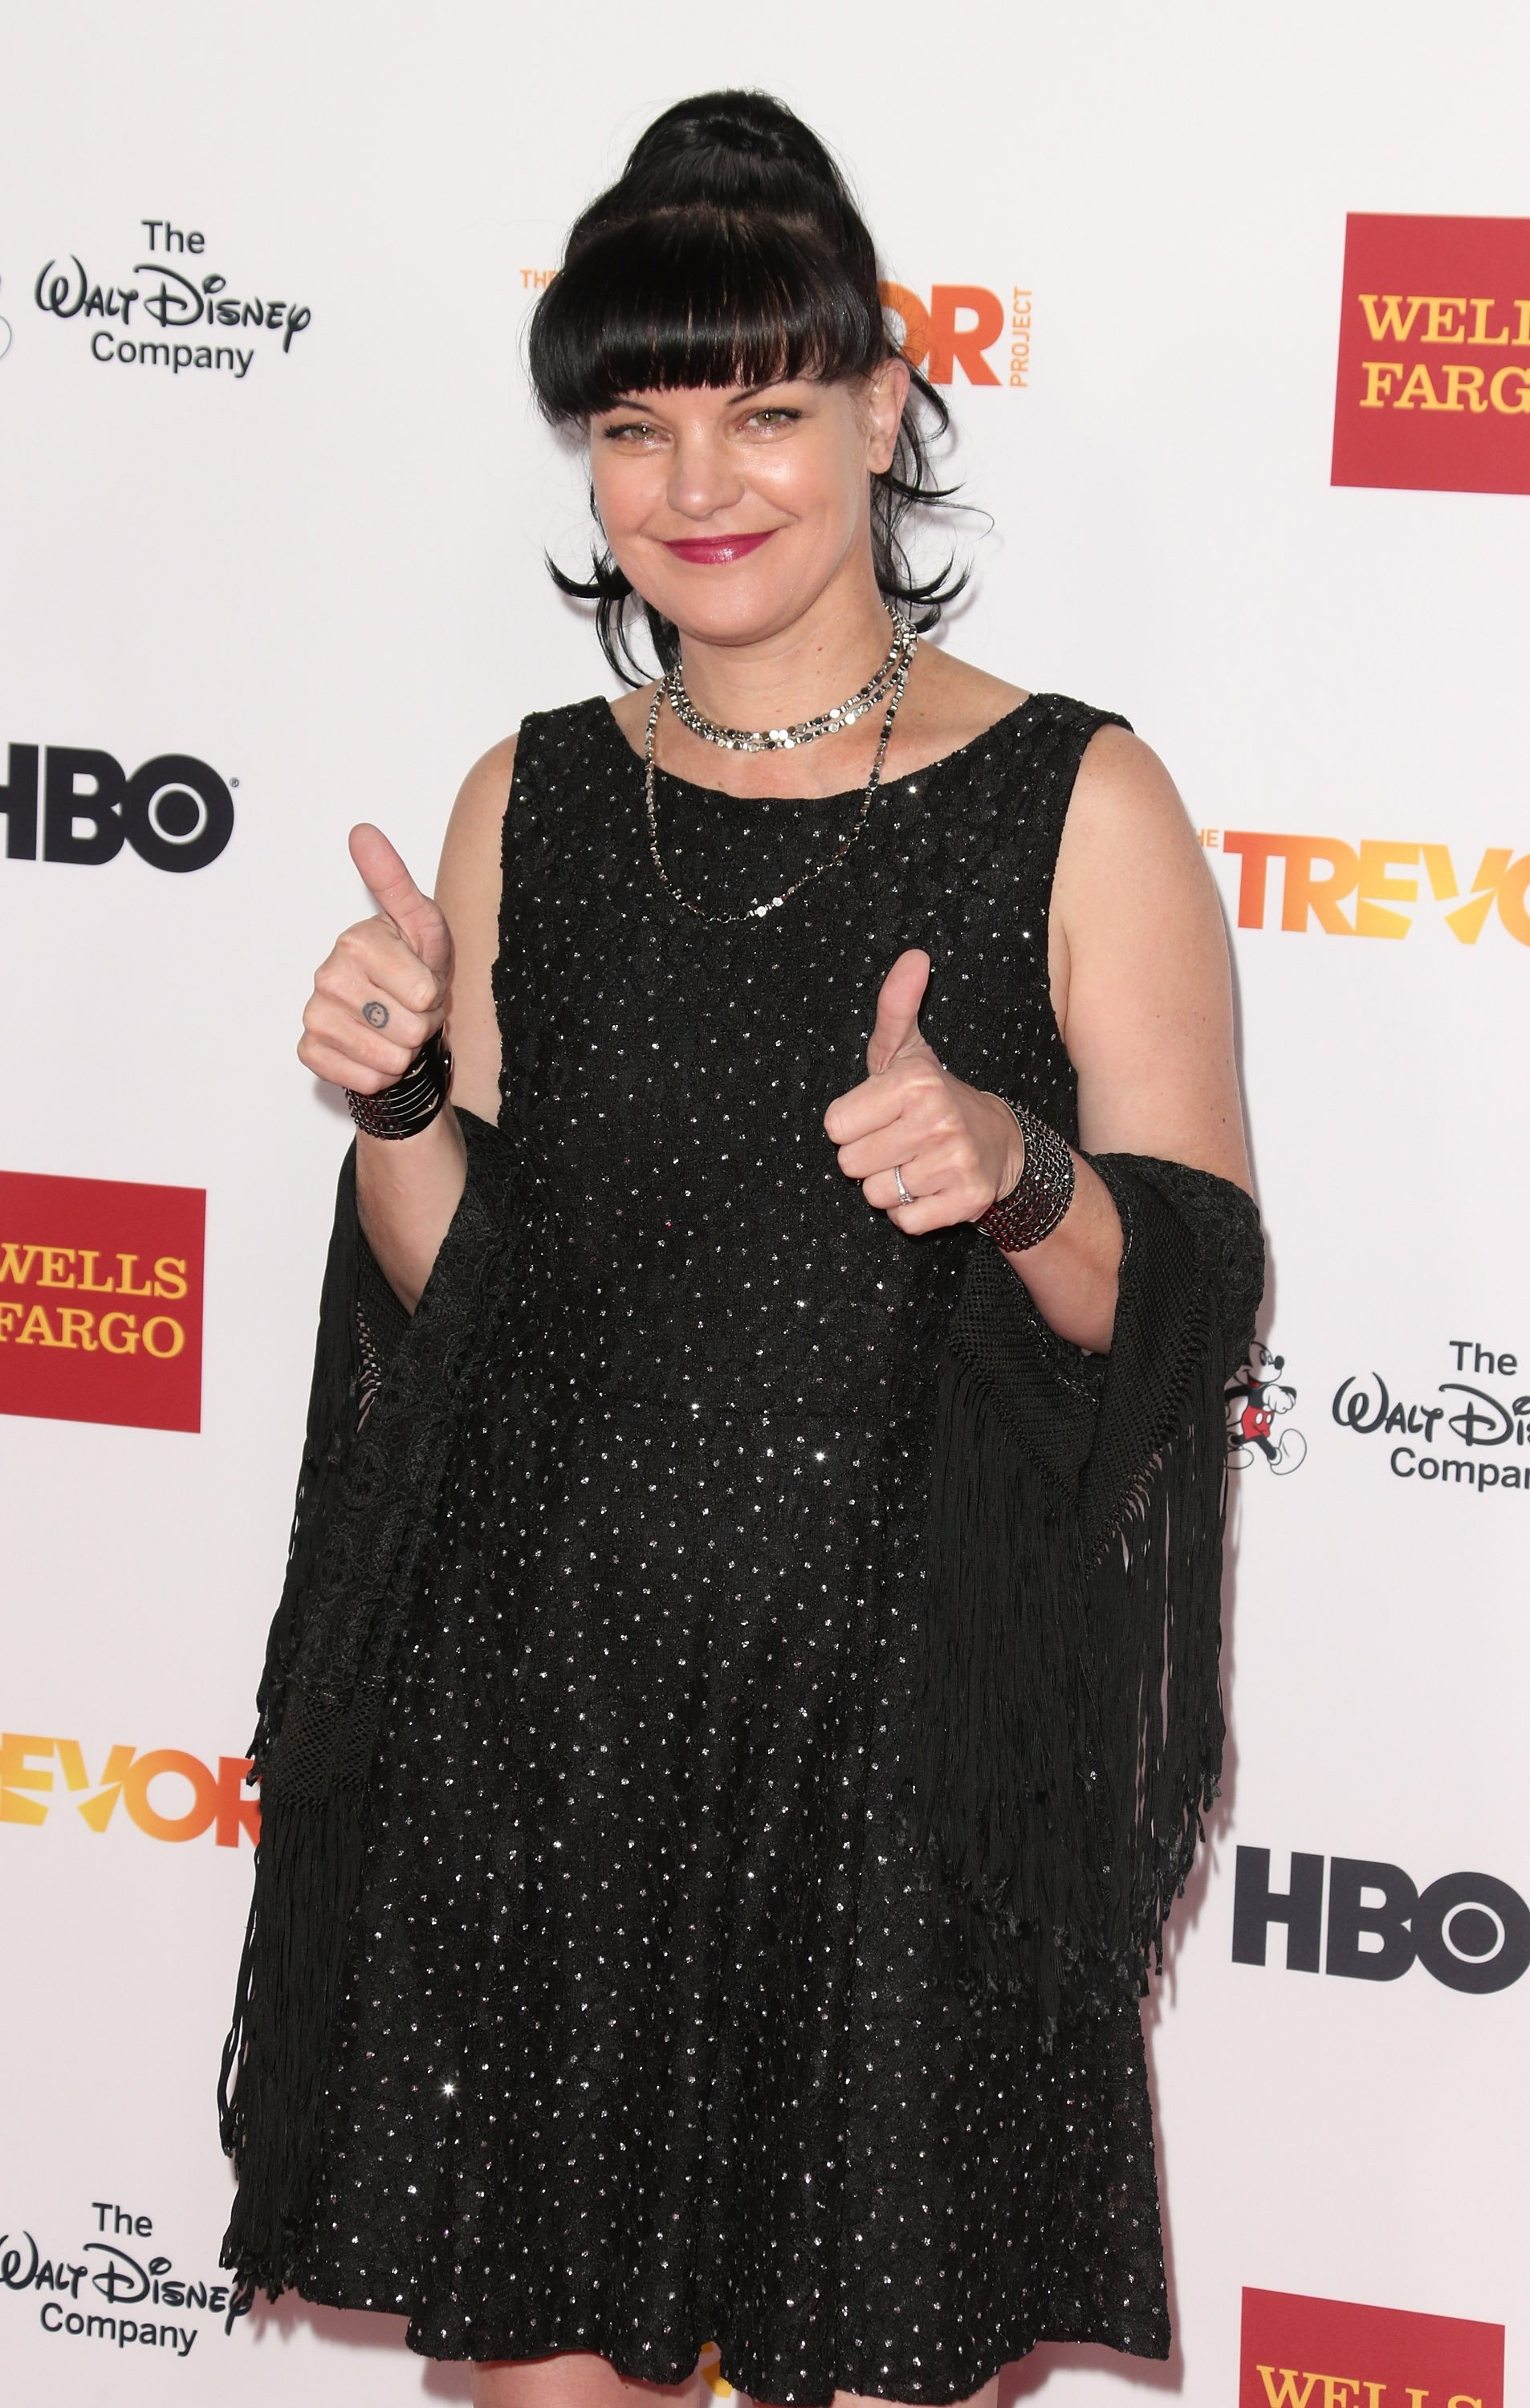 Pauley Perrette attends TrevorLIVE LA at Hollywood Palladium on December 6, 2015 | Photo: GettyImages